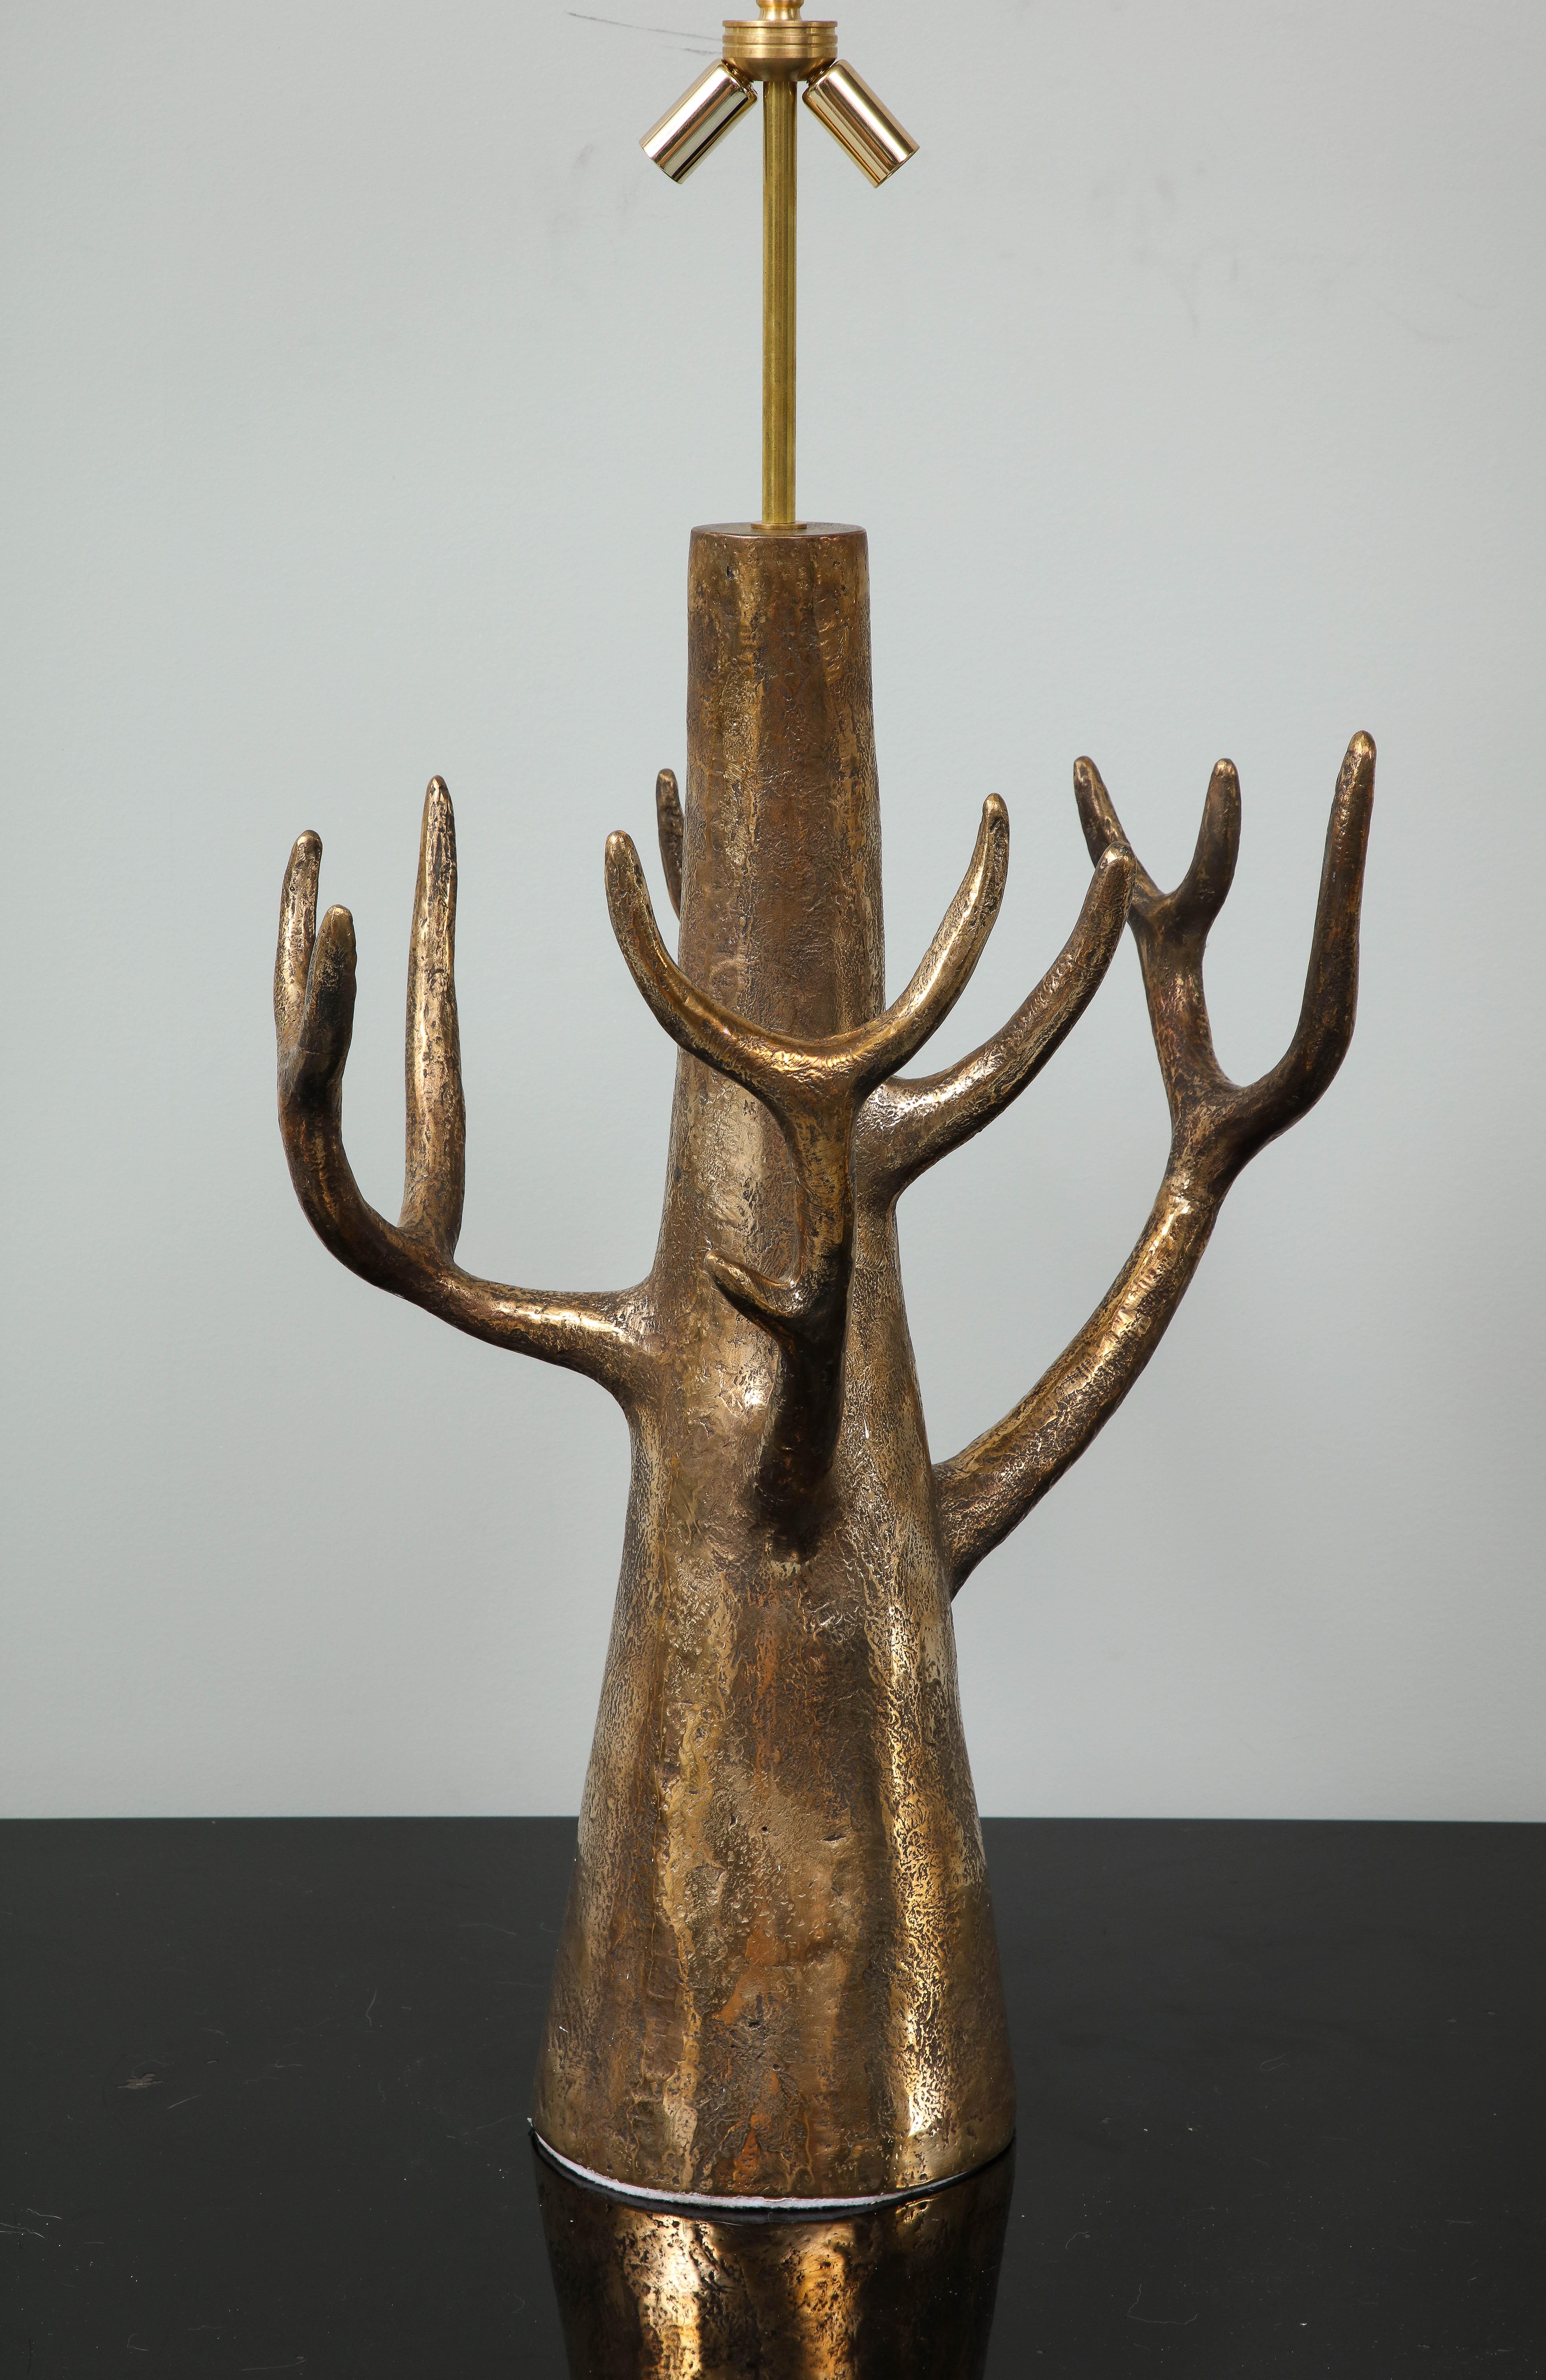 This lamp in bronze is unique and numbered 2 out of 8. Only 2 have been made by the sculptor. The tree is the inspiration and this lamp which has been American wire, can be considered as a sculpture. 